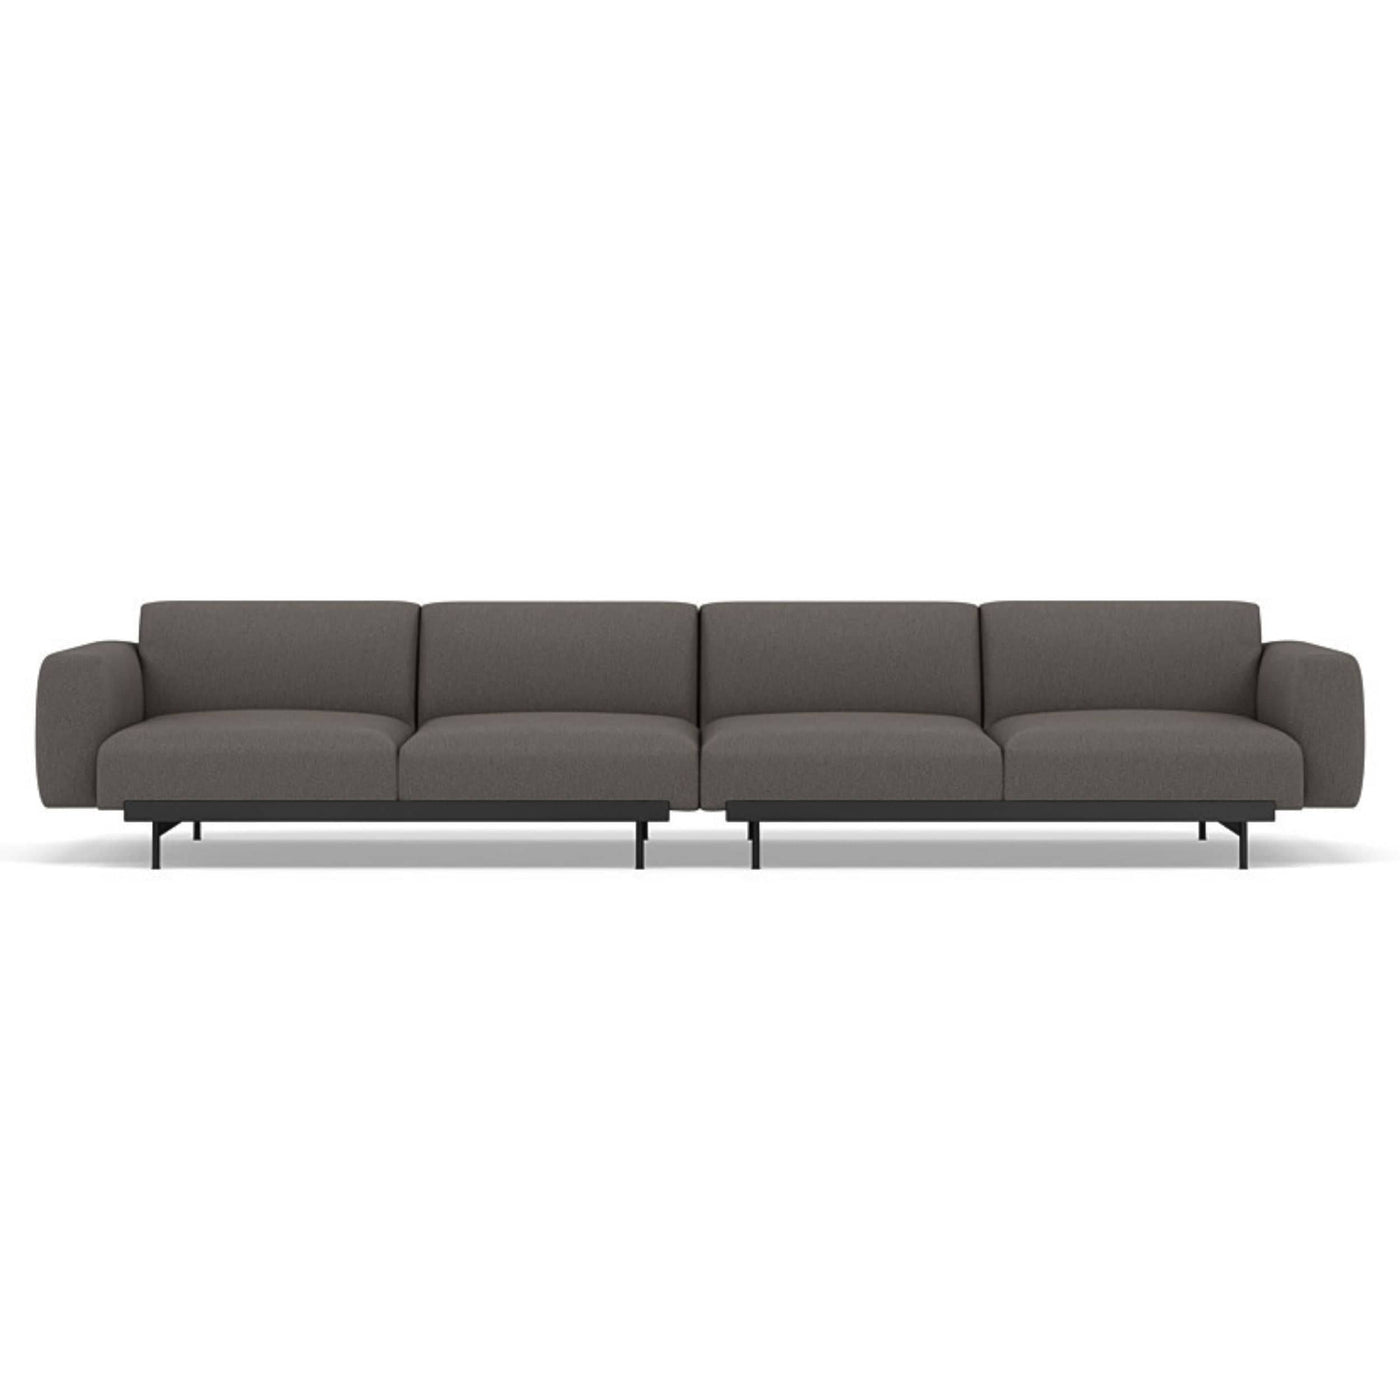 Muuto In Situ Modular 4 Seater Sofa configuration 1. Made to order from someday designs. #colour_clay-9